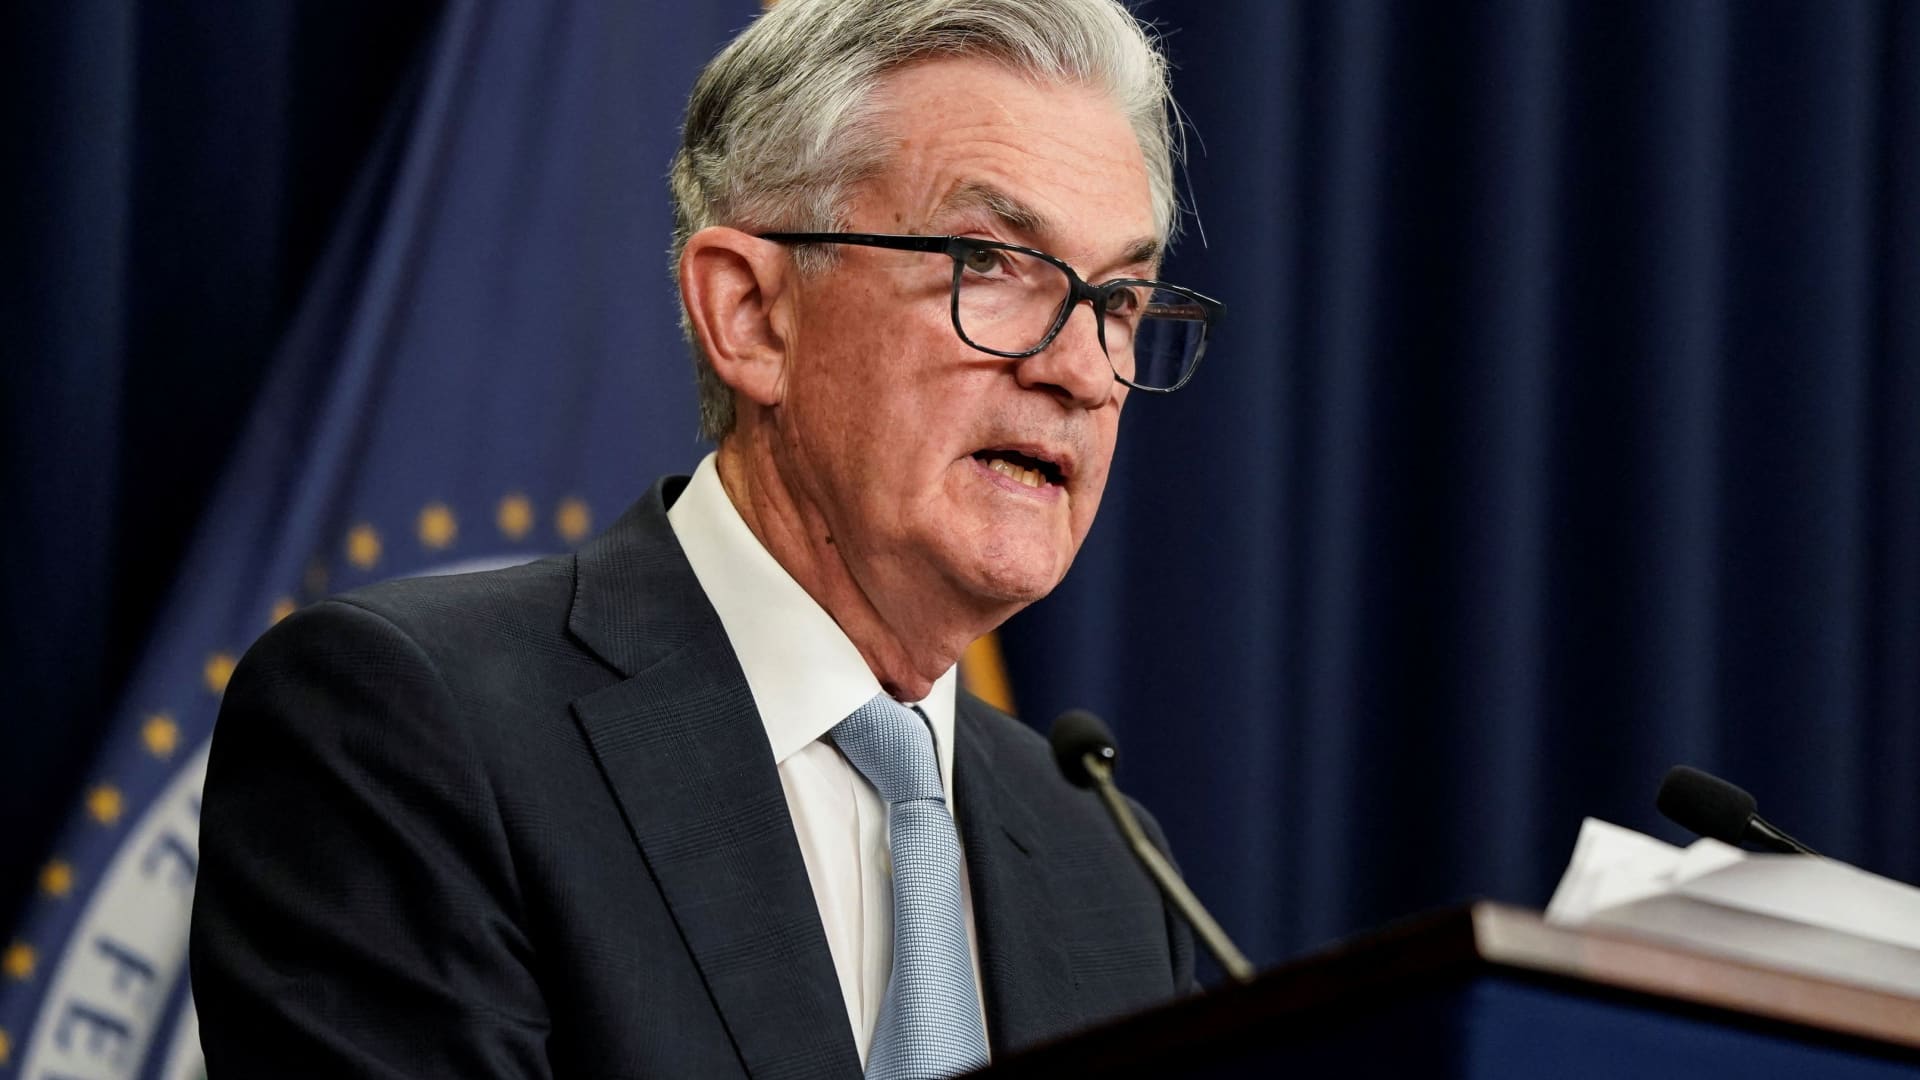 Powell vows that the Fed is ‘acutely focused’ on bringing down inflation